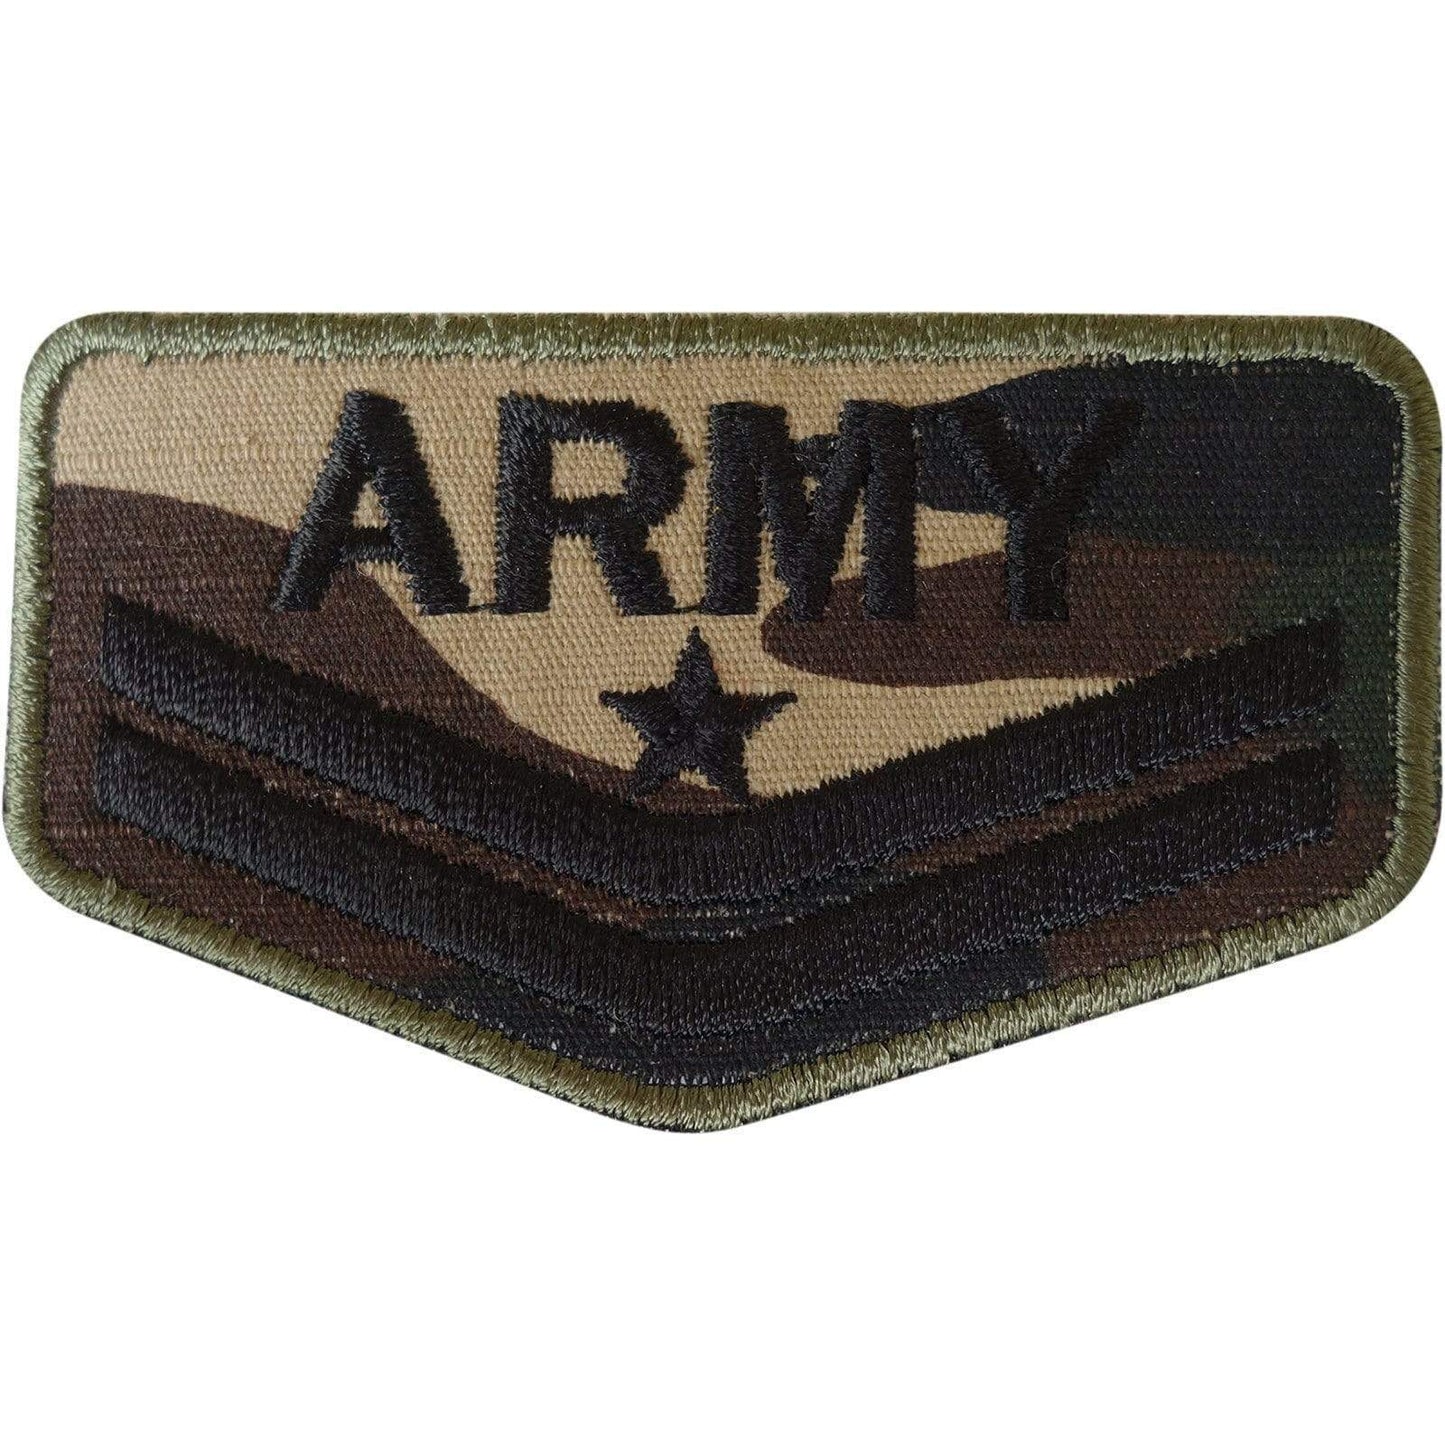 Army Soldier Military Patch Embroidered Badge Iron On Sew On Uniform Fancy Dress